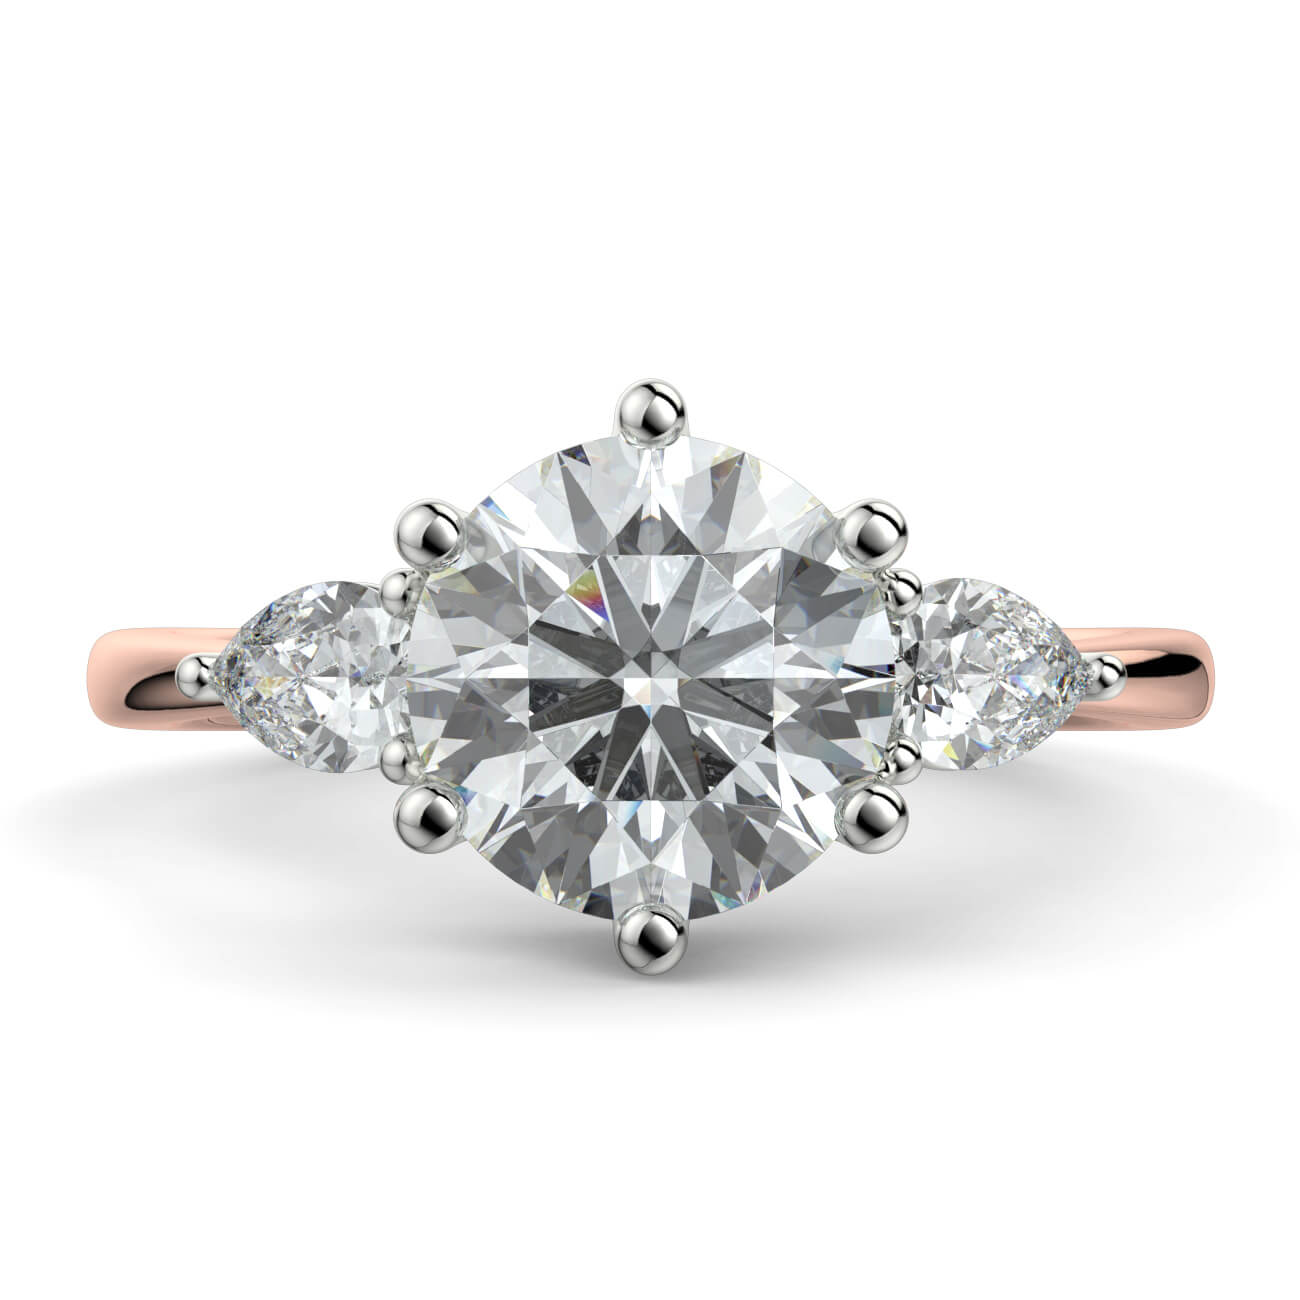 Round Brilliant Cut Diamond Ring With Pear Shape Side Diamonds In Rose and White Gold – Australian Diamond Network